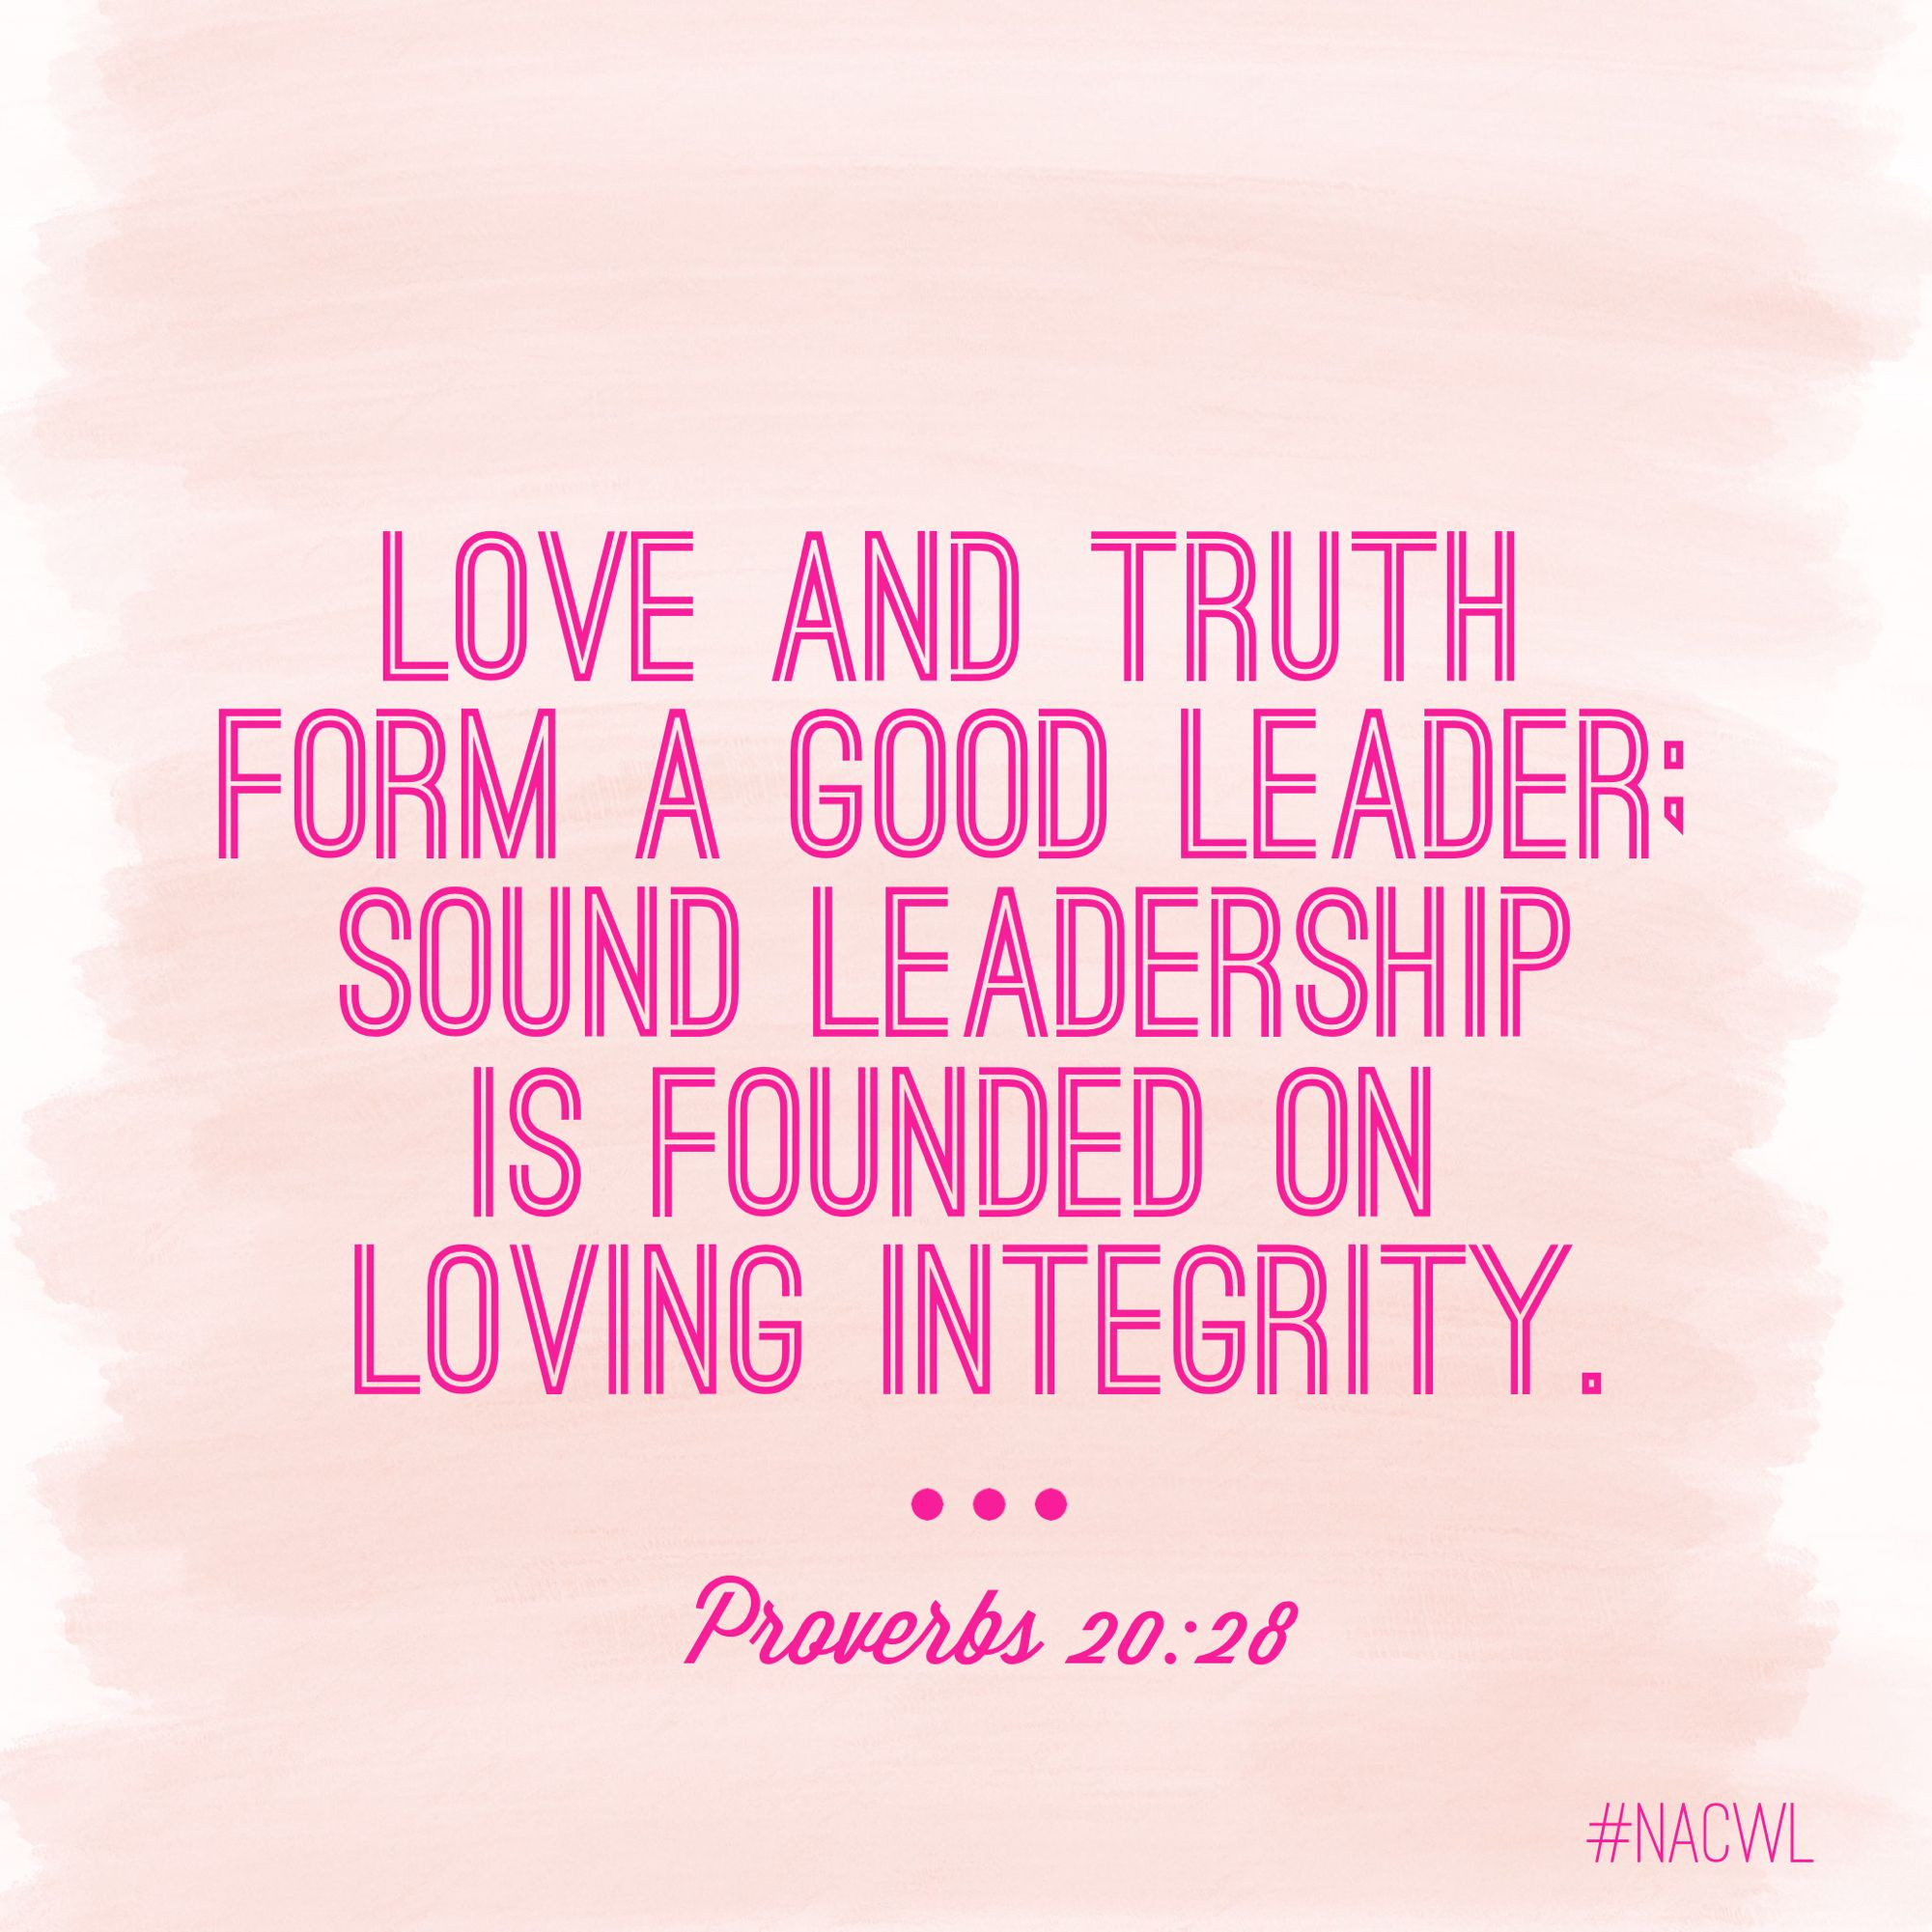 Bible Quotes About Leadership
 Love and truth form a good leader sound leadership is